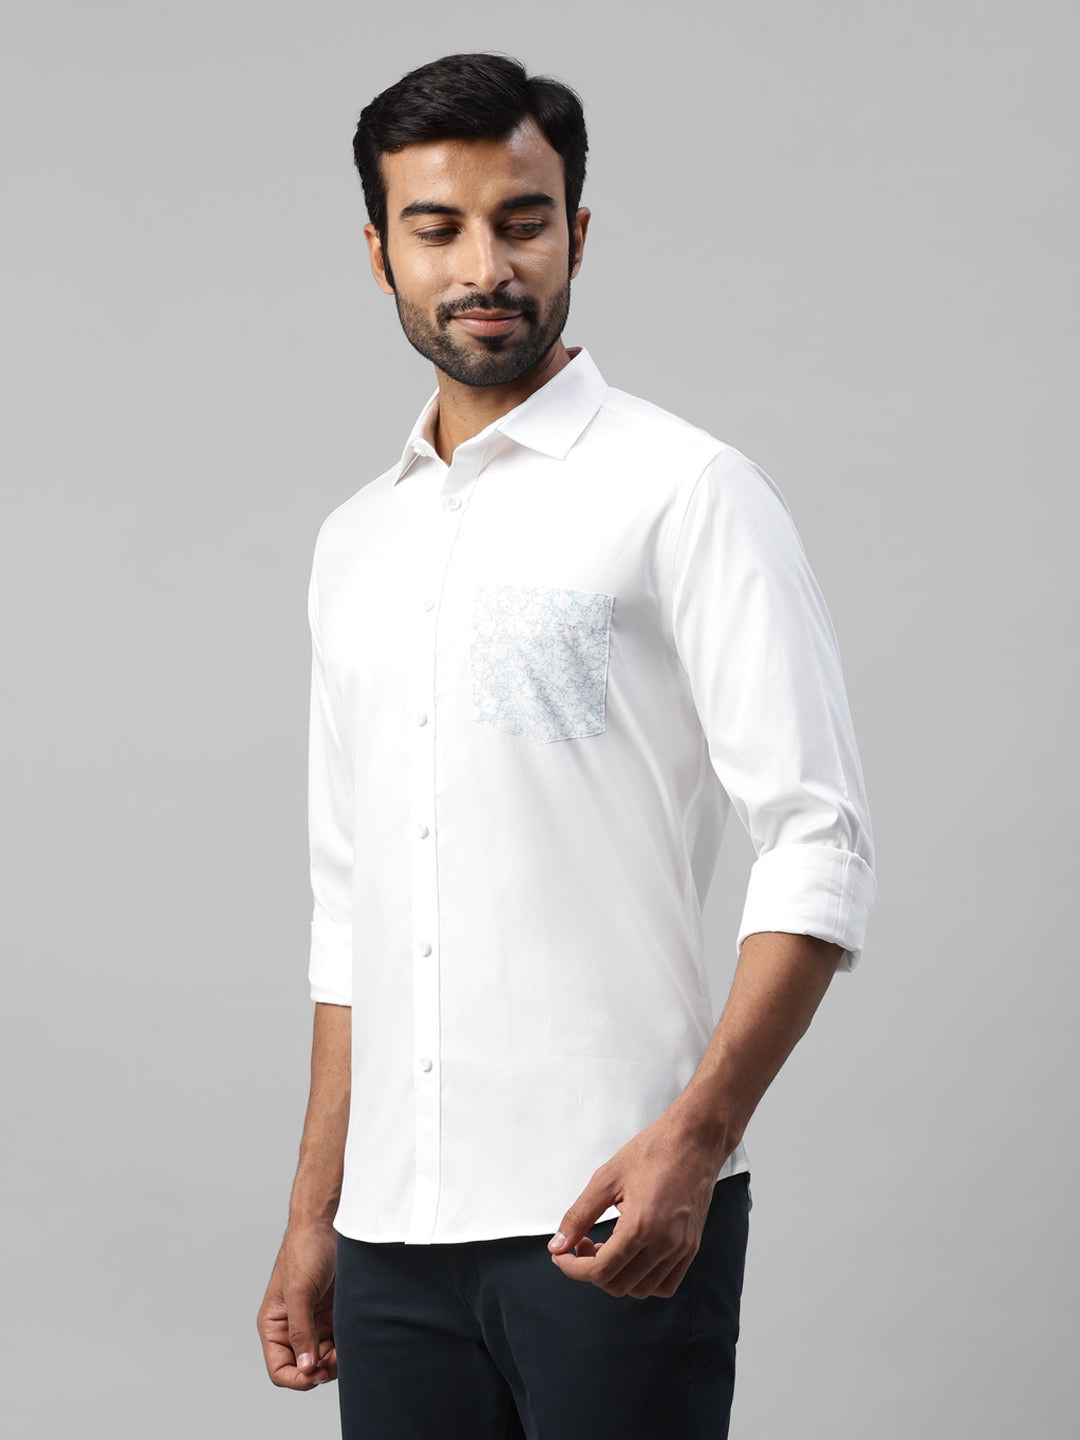 Don Vino Men's Slim Fit Shirt with Contrast Pockets